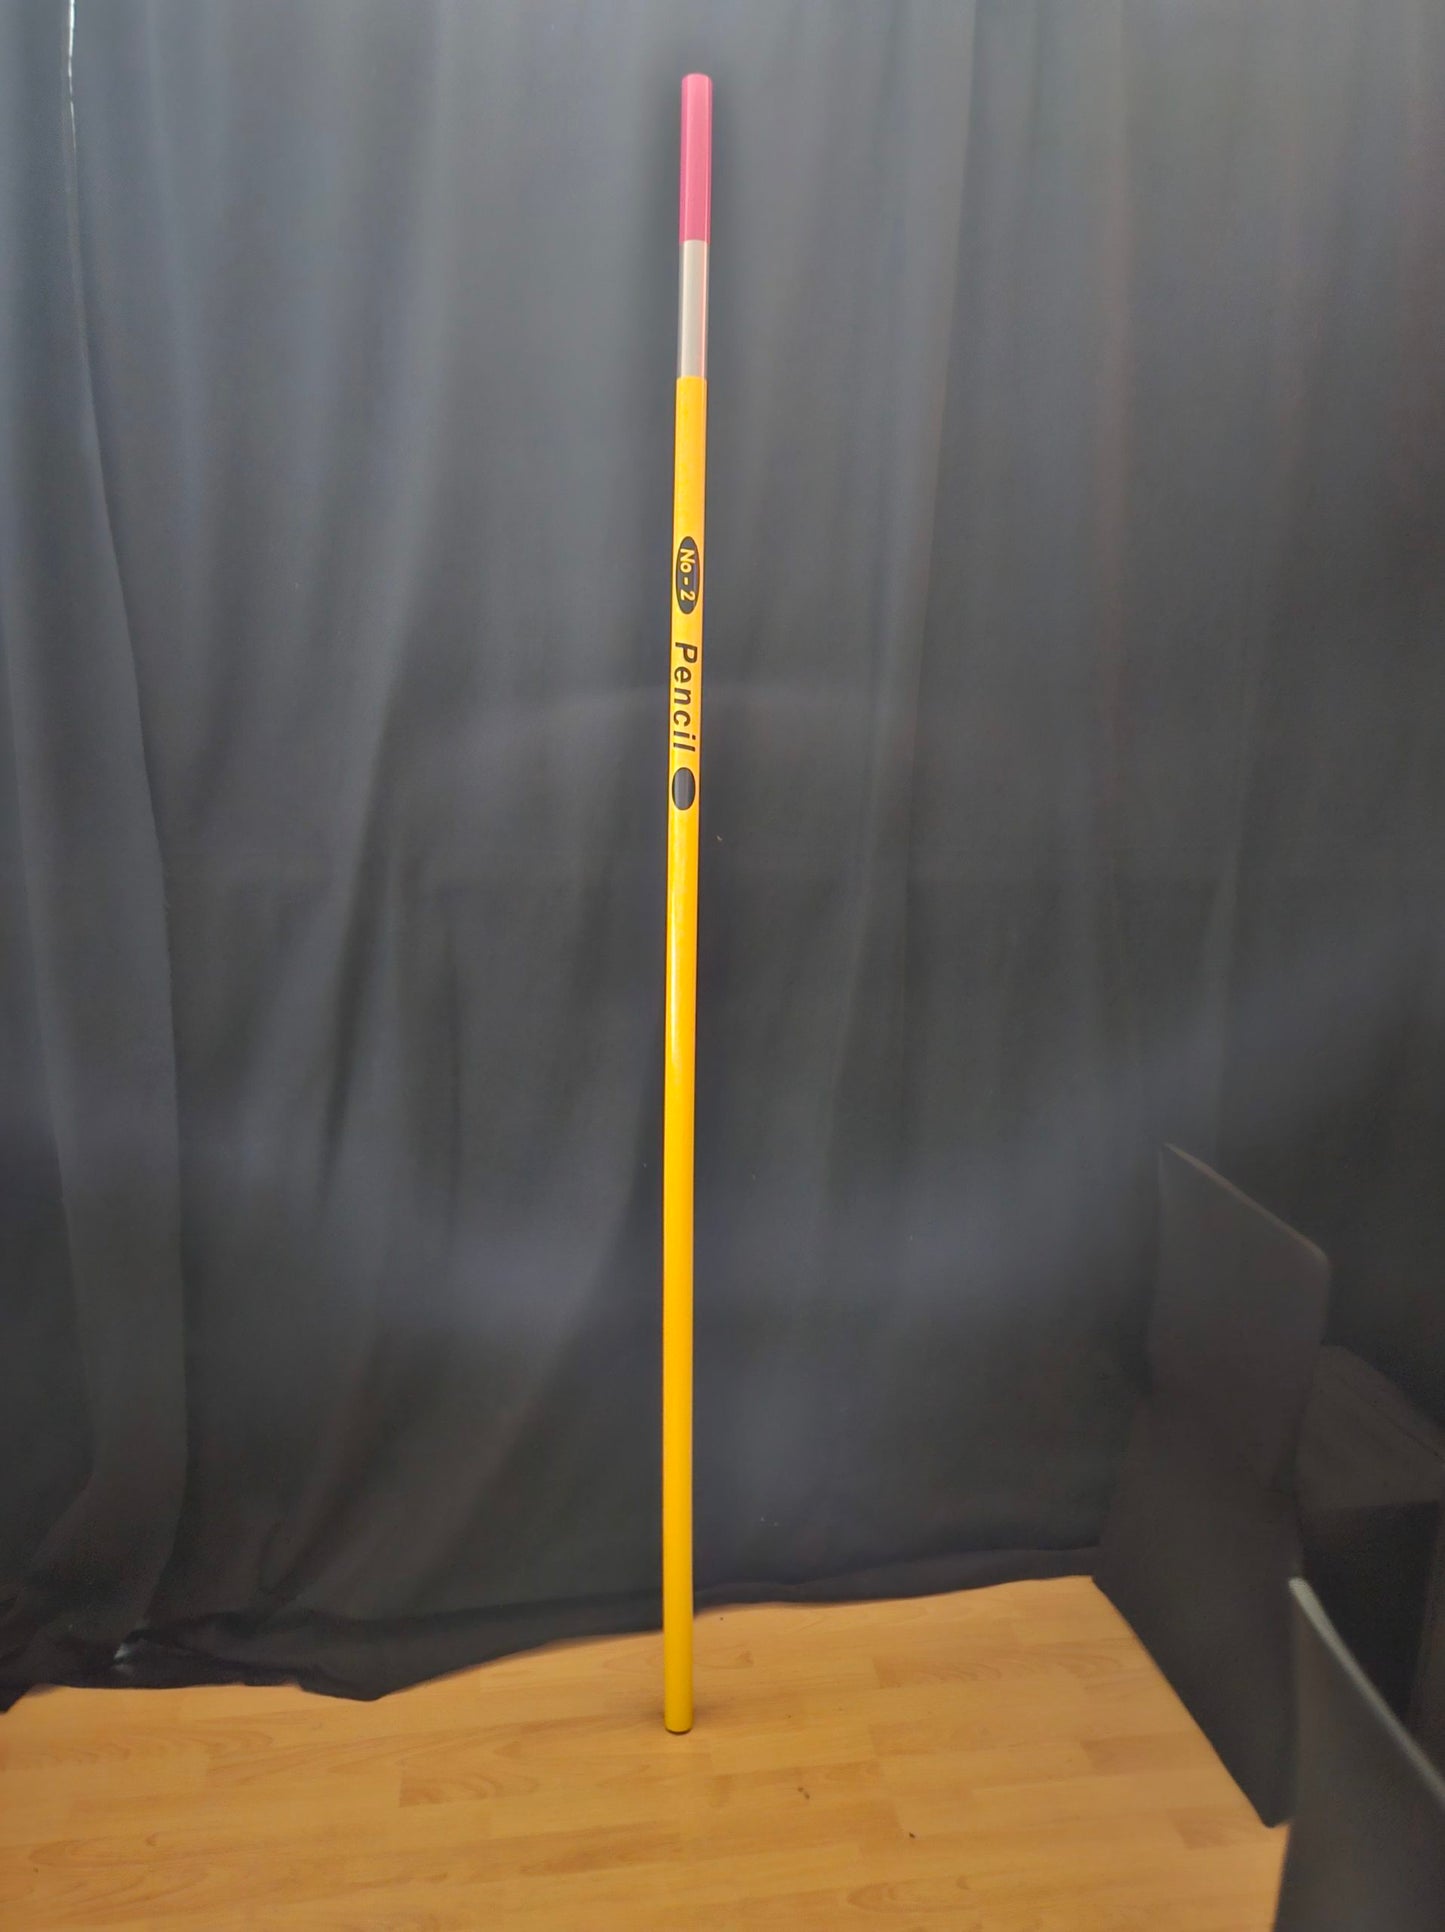 Appearing 8 Foot Pencil